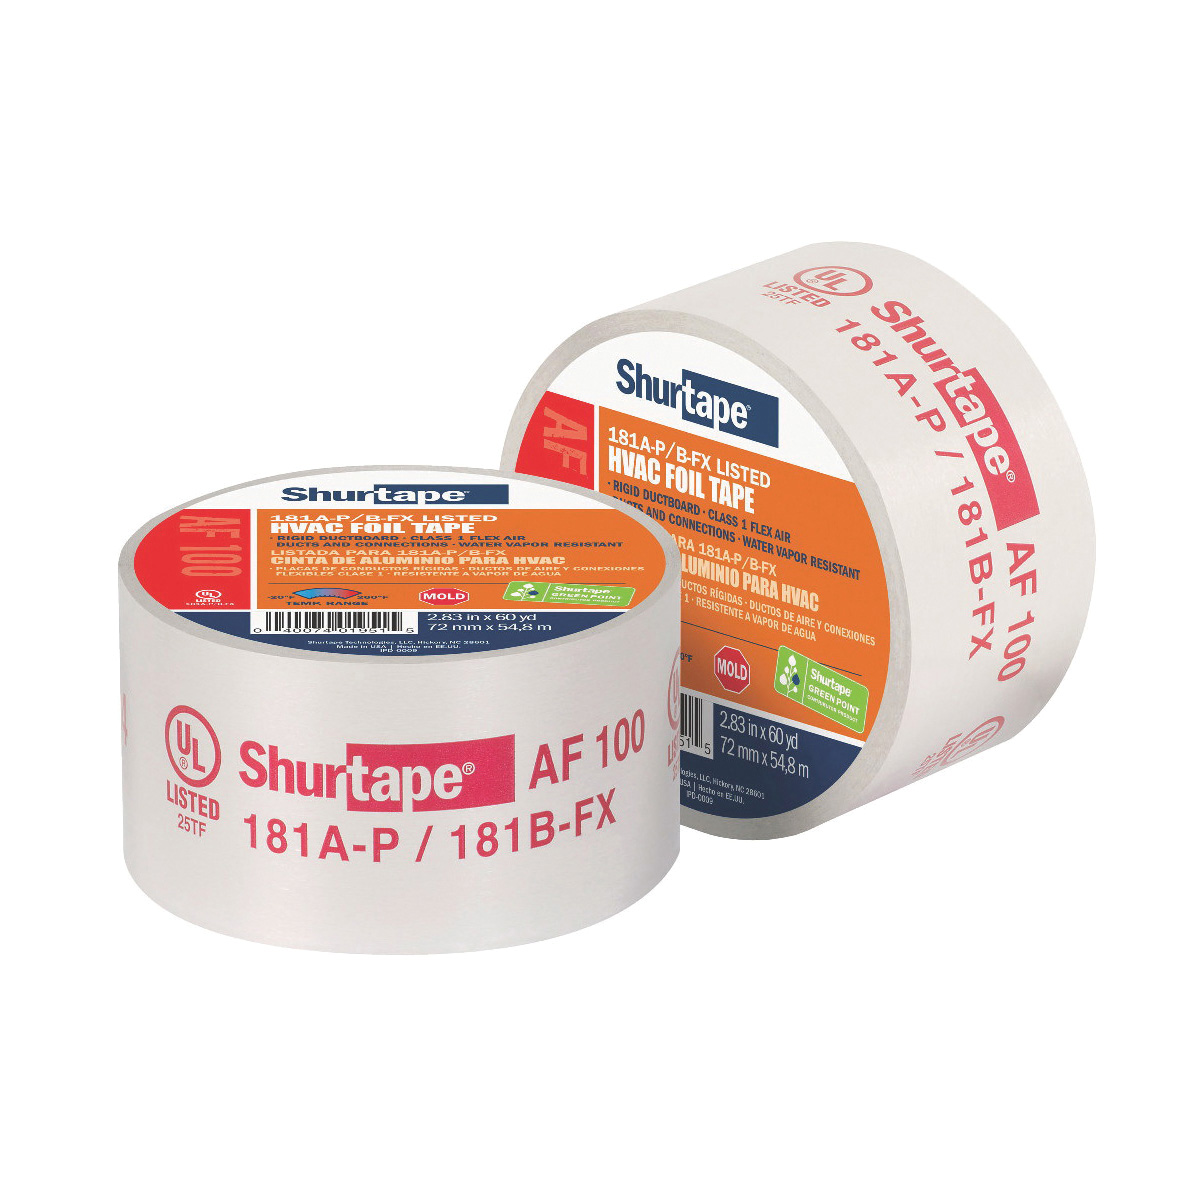 Shurtape® 155206 AF 100 HVAC Grade Printed Foil Tape, 60 yd L x 2-1/2 in W, 6.8 mil with Liner/4.2 mil without Liner THK, Acrylic Adhesive, Dead-Soft Aluminum Foil Backing, Silver